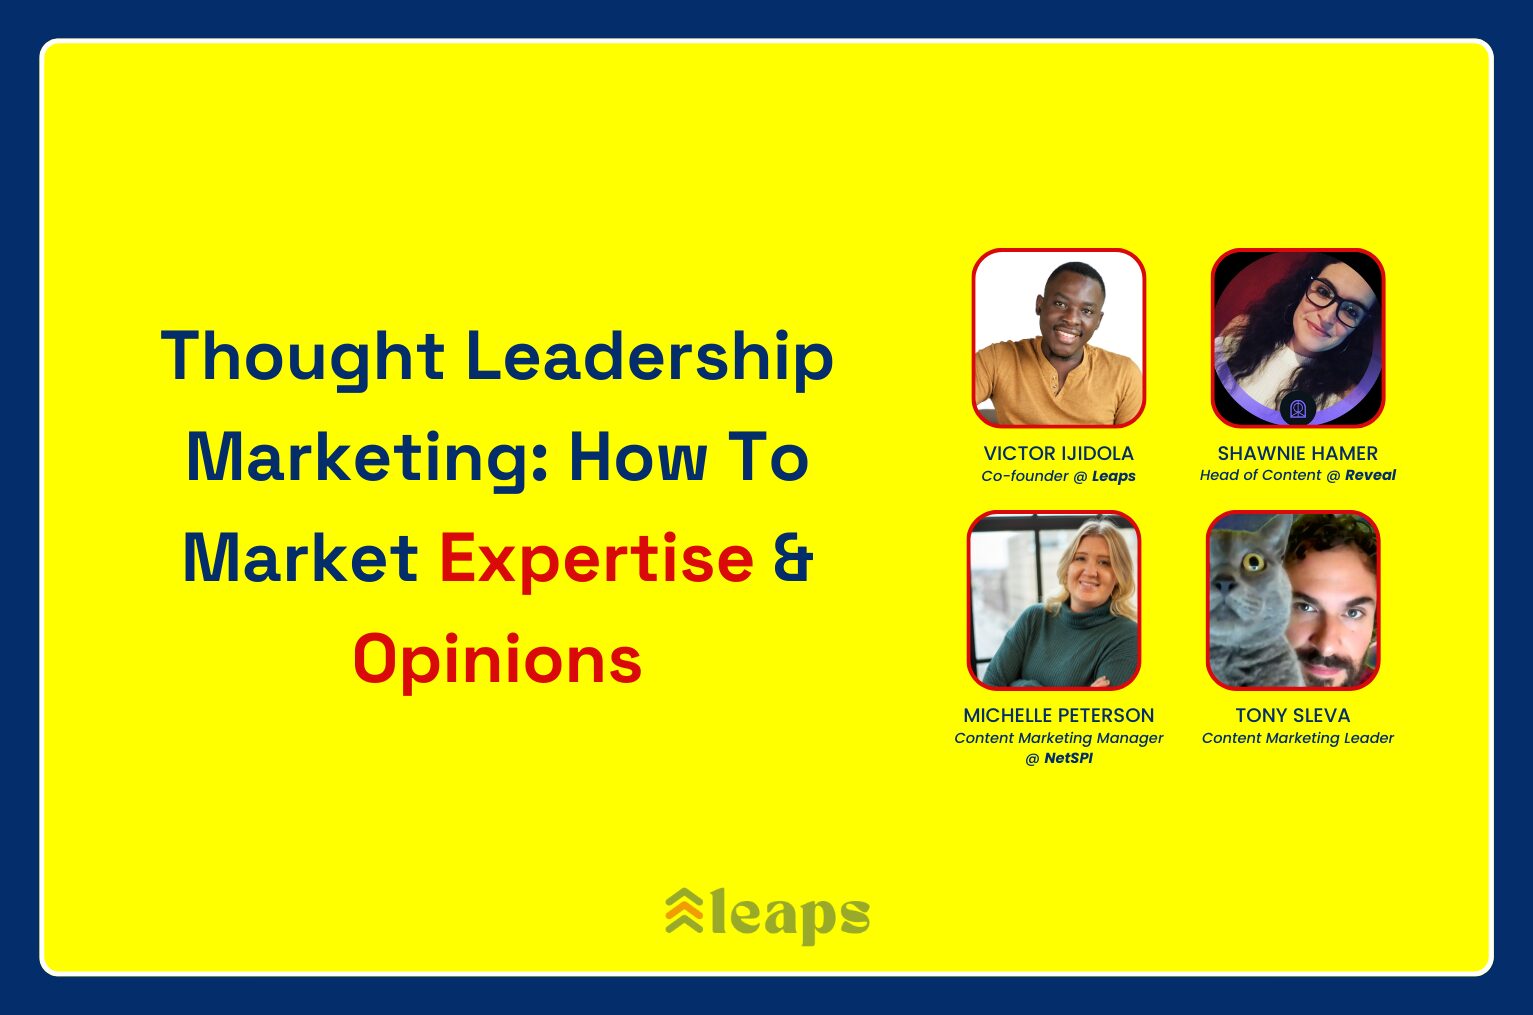 Thought Leadership Marketing: How To Market Expertise & Opinions